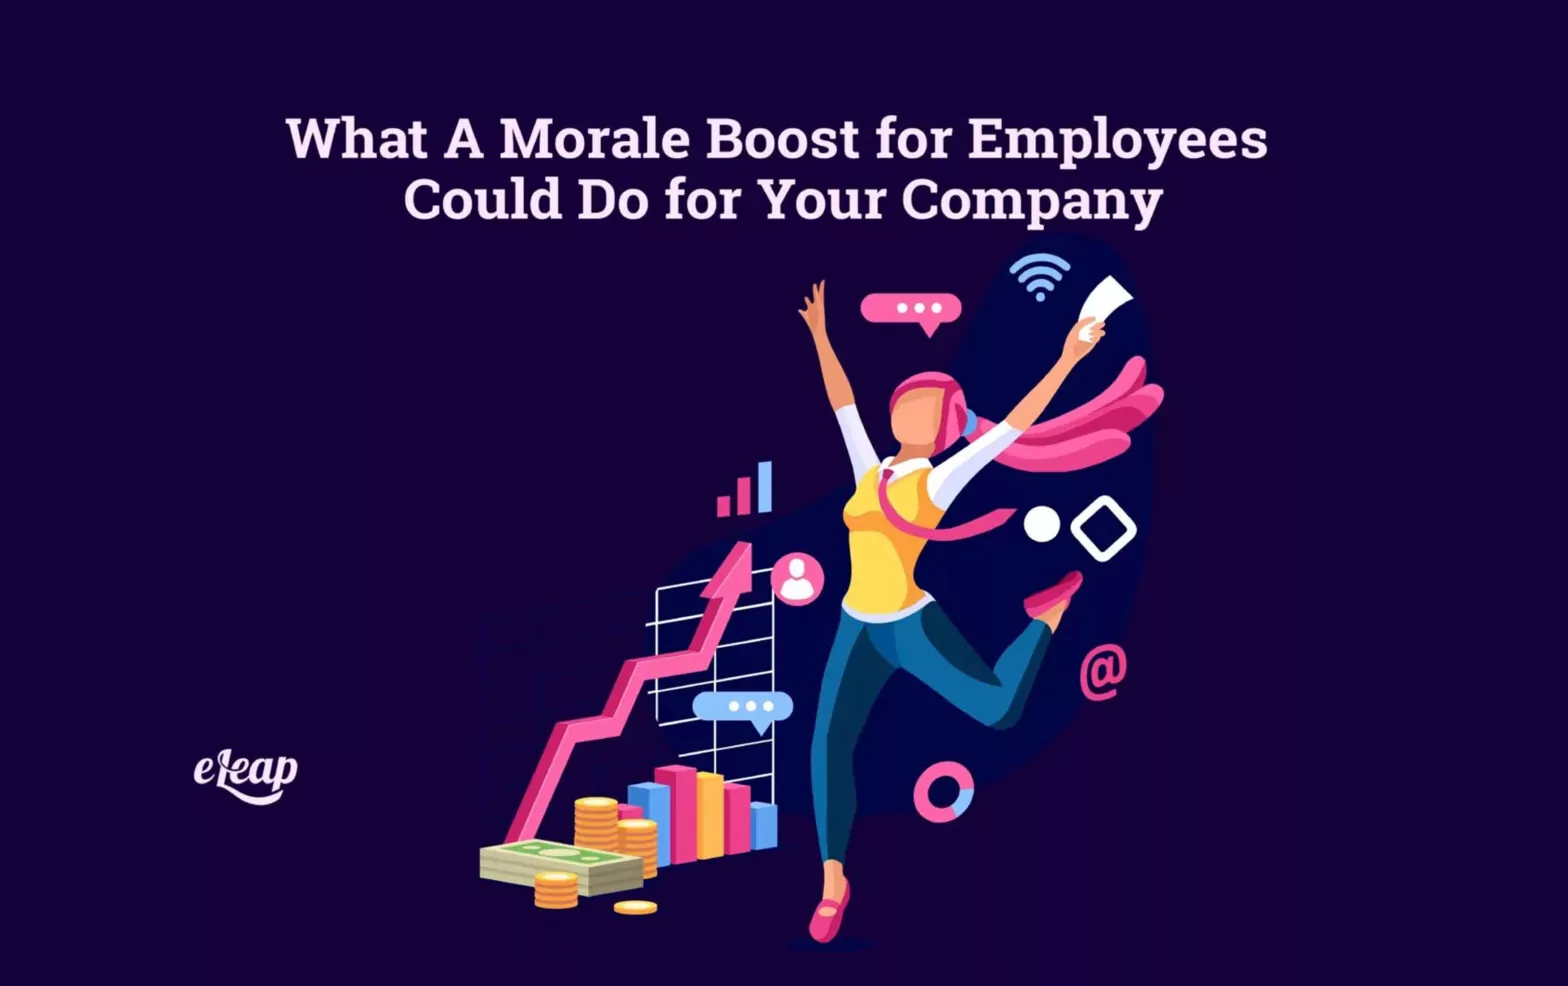 What A Morale Boost for Employees Could Do for Your Company